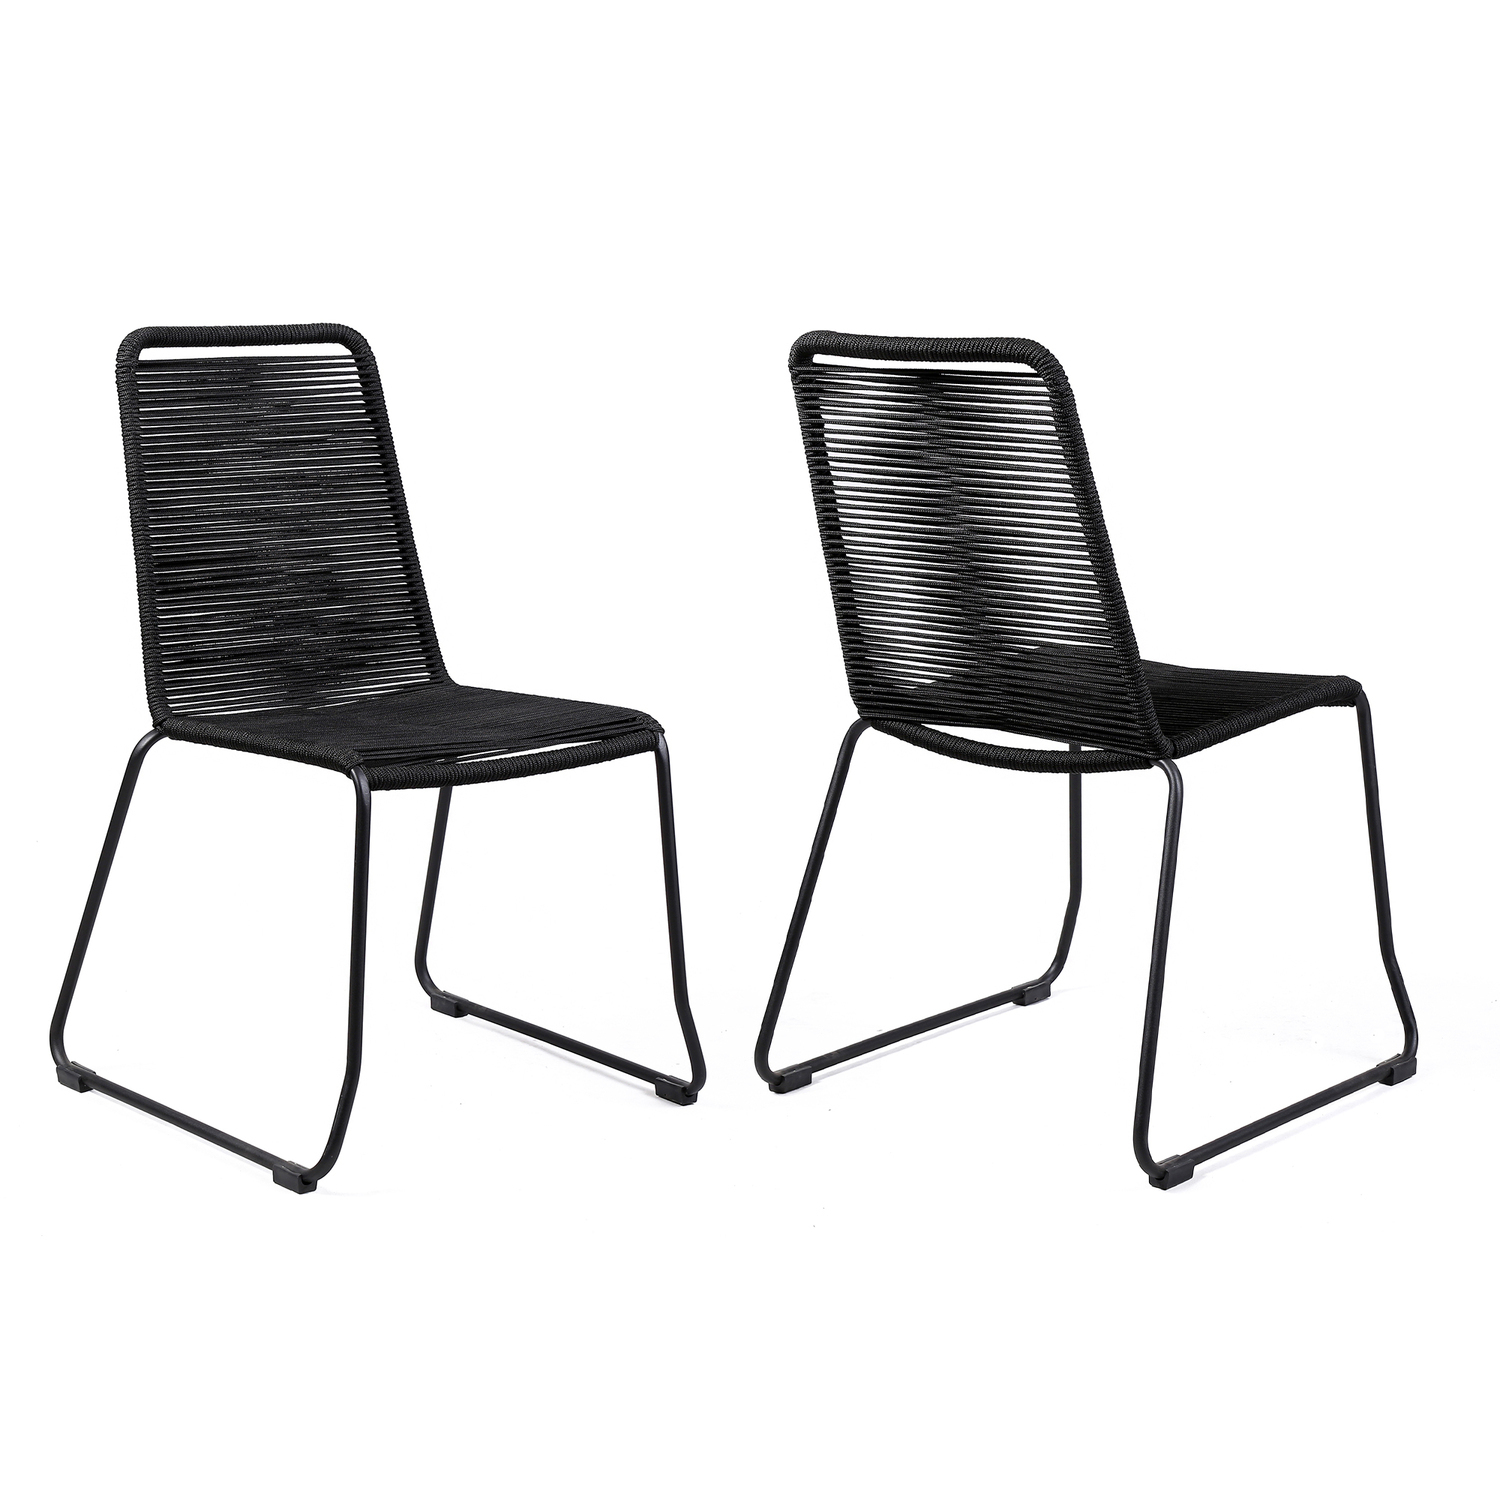 Armen Living Shasta 18.5" Fabric Patio Dining Chair in Black (Set of 2) - image 1 of 8